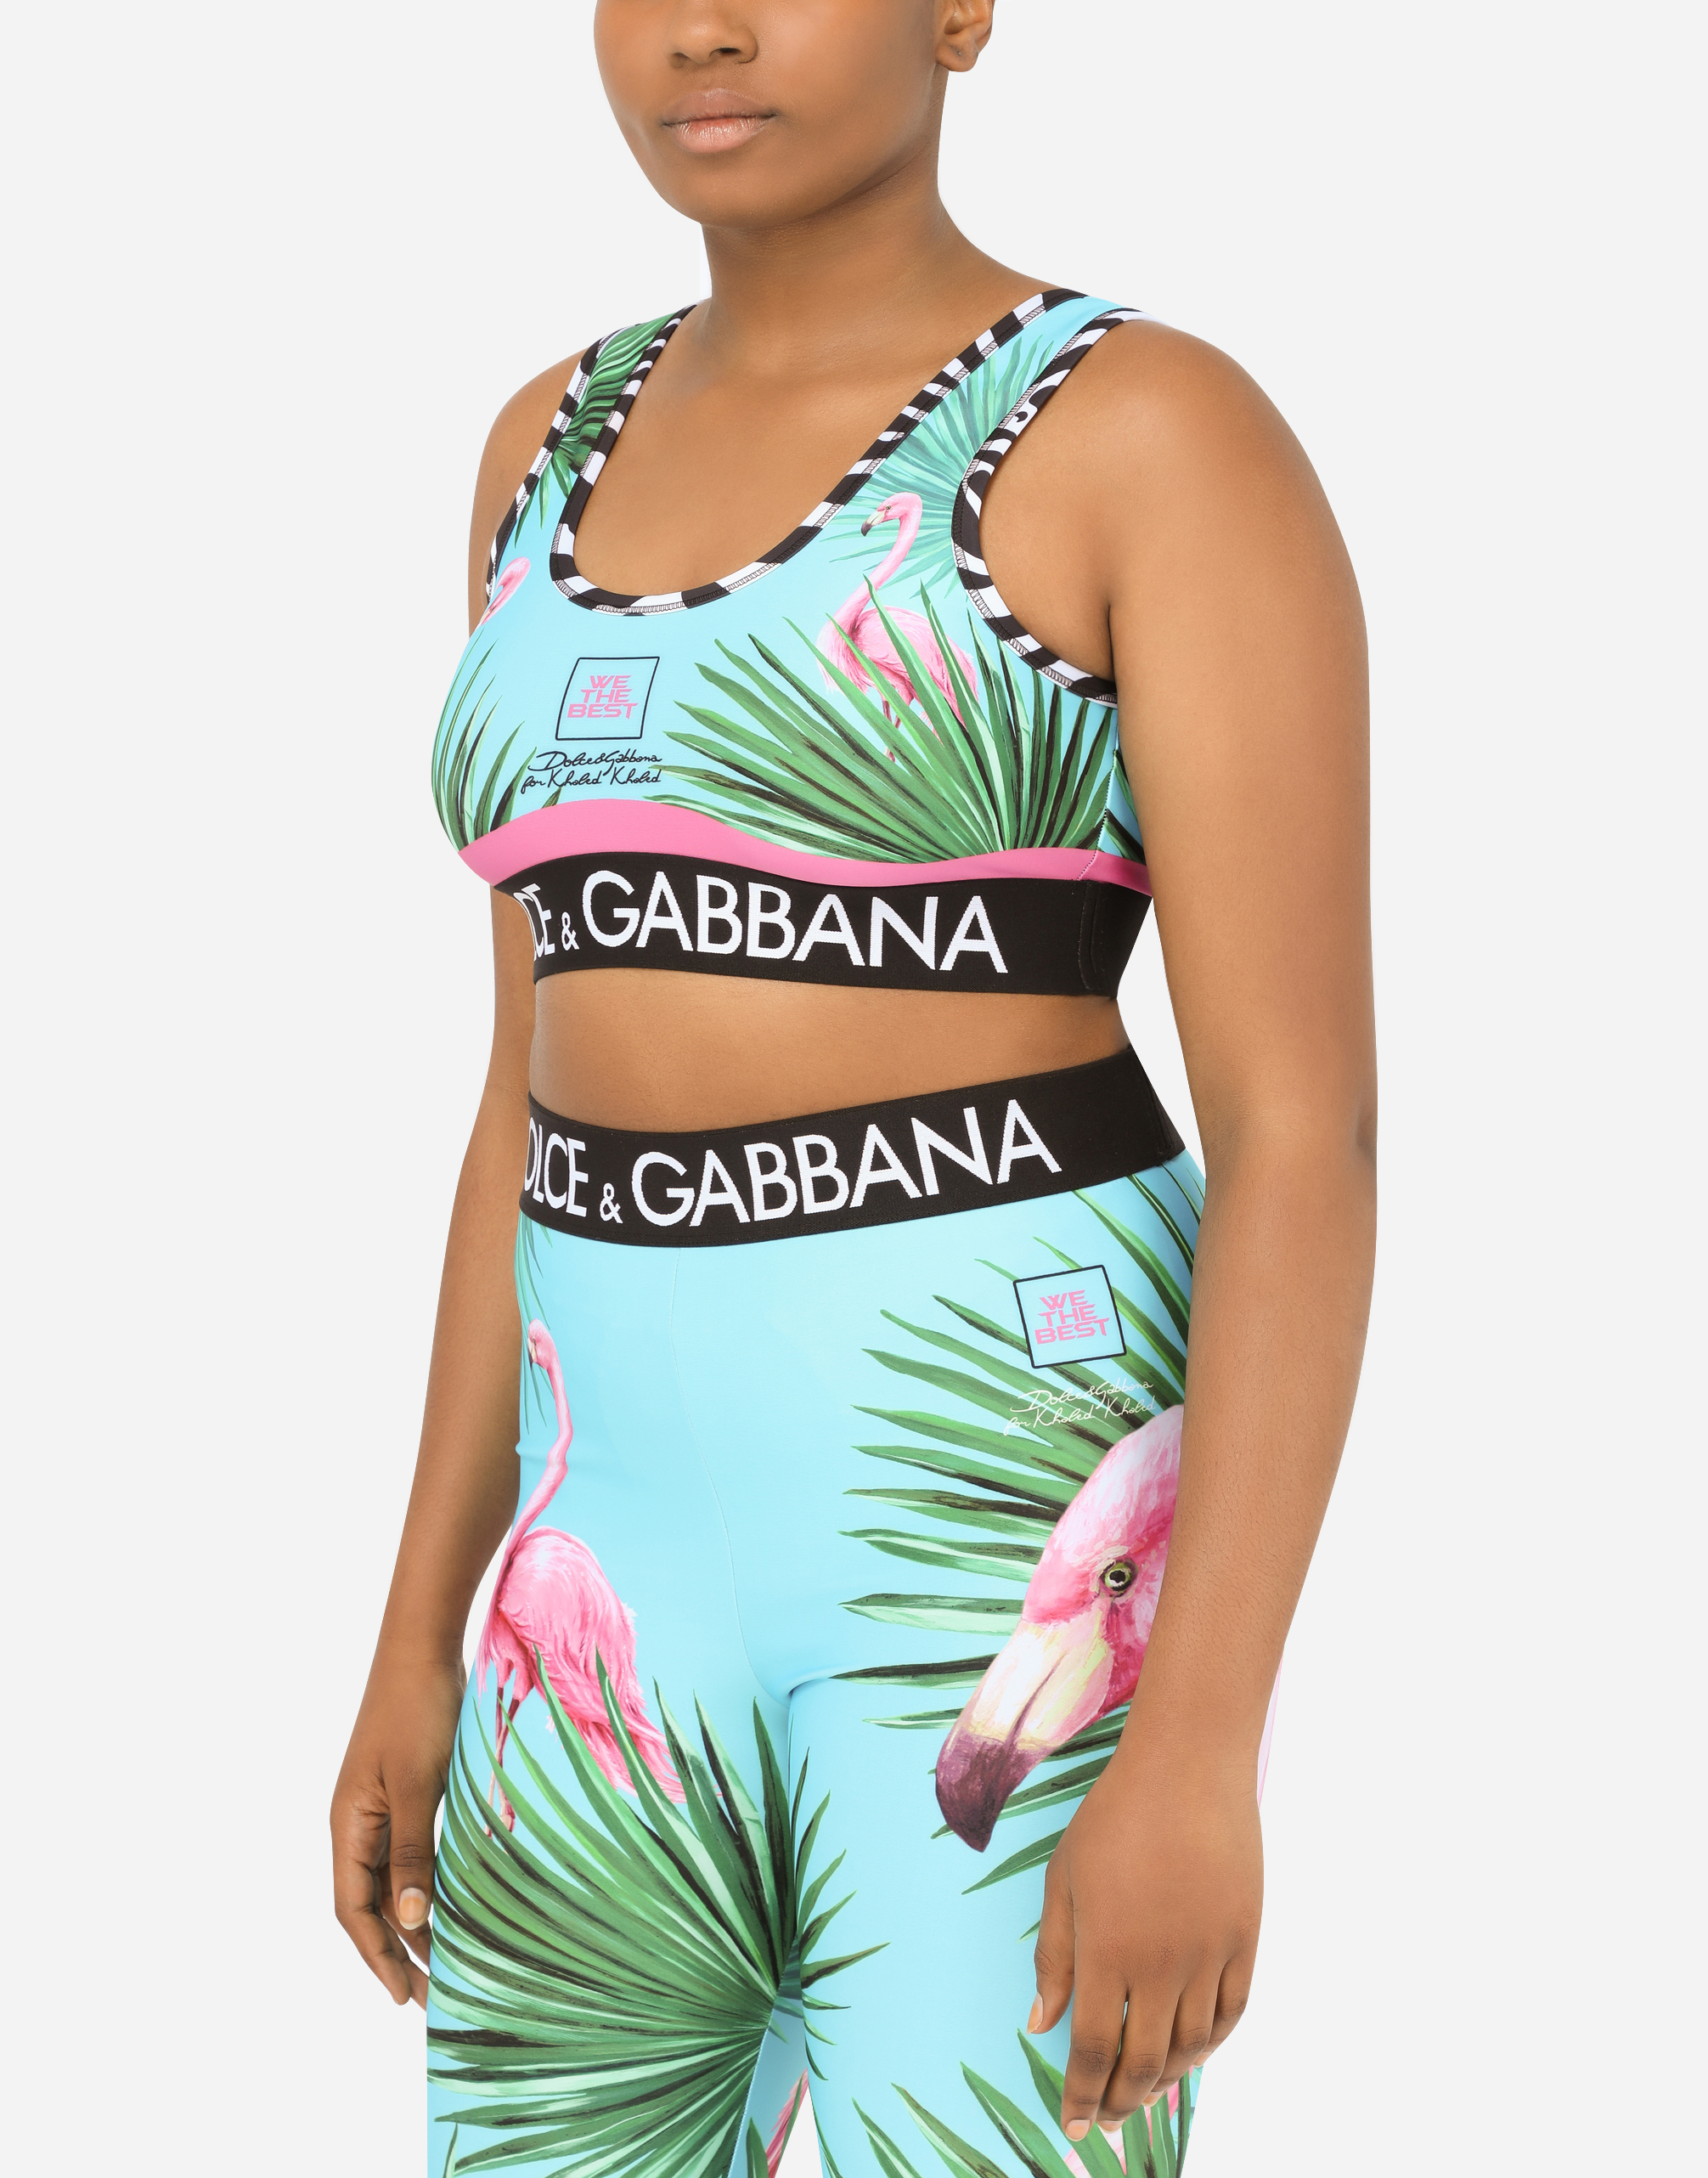 Shirts and Tops for Women | Dolce&Gabbana - Flamingo-print top 